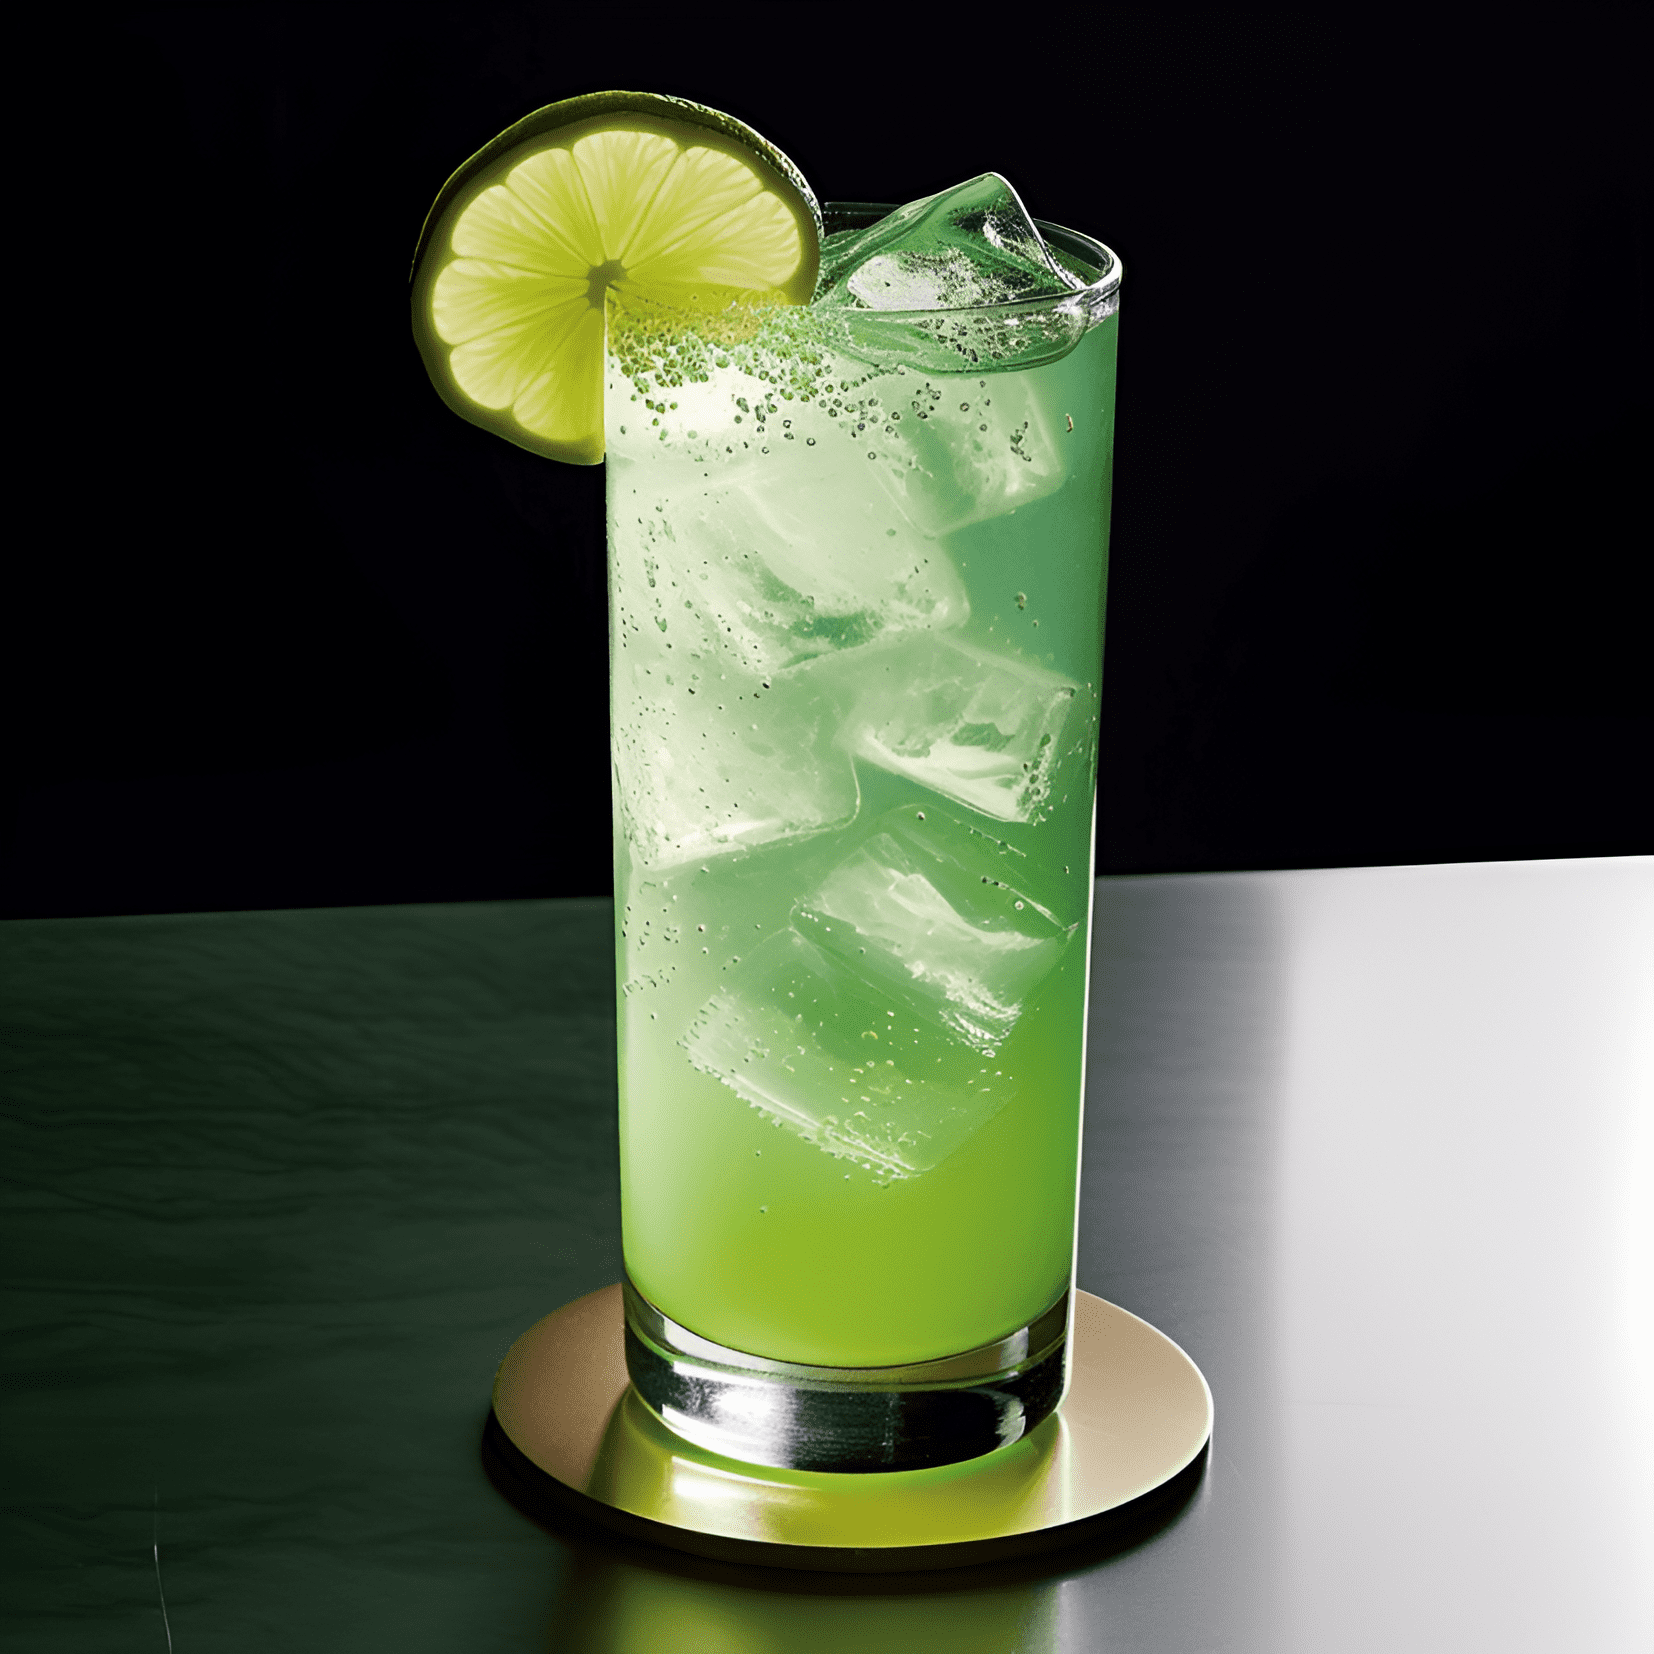 Lime Rickey Cocktail Recipe - The Lime Rickey is a refreshing, tangy, and slightly sweet cocktail. It has a bright citrus flavor from the fresh lime juice, balanced by the subtle sweetness of the simple syrup. The gin adds a hint of herbal and floral notes, while the club soda gives it a light and effervescent finish.